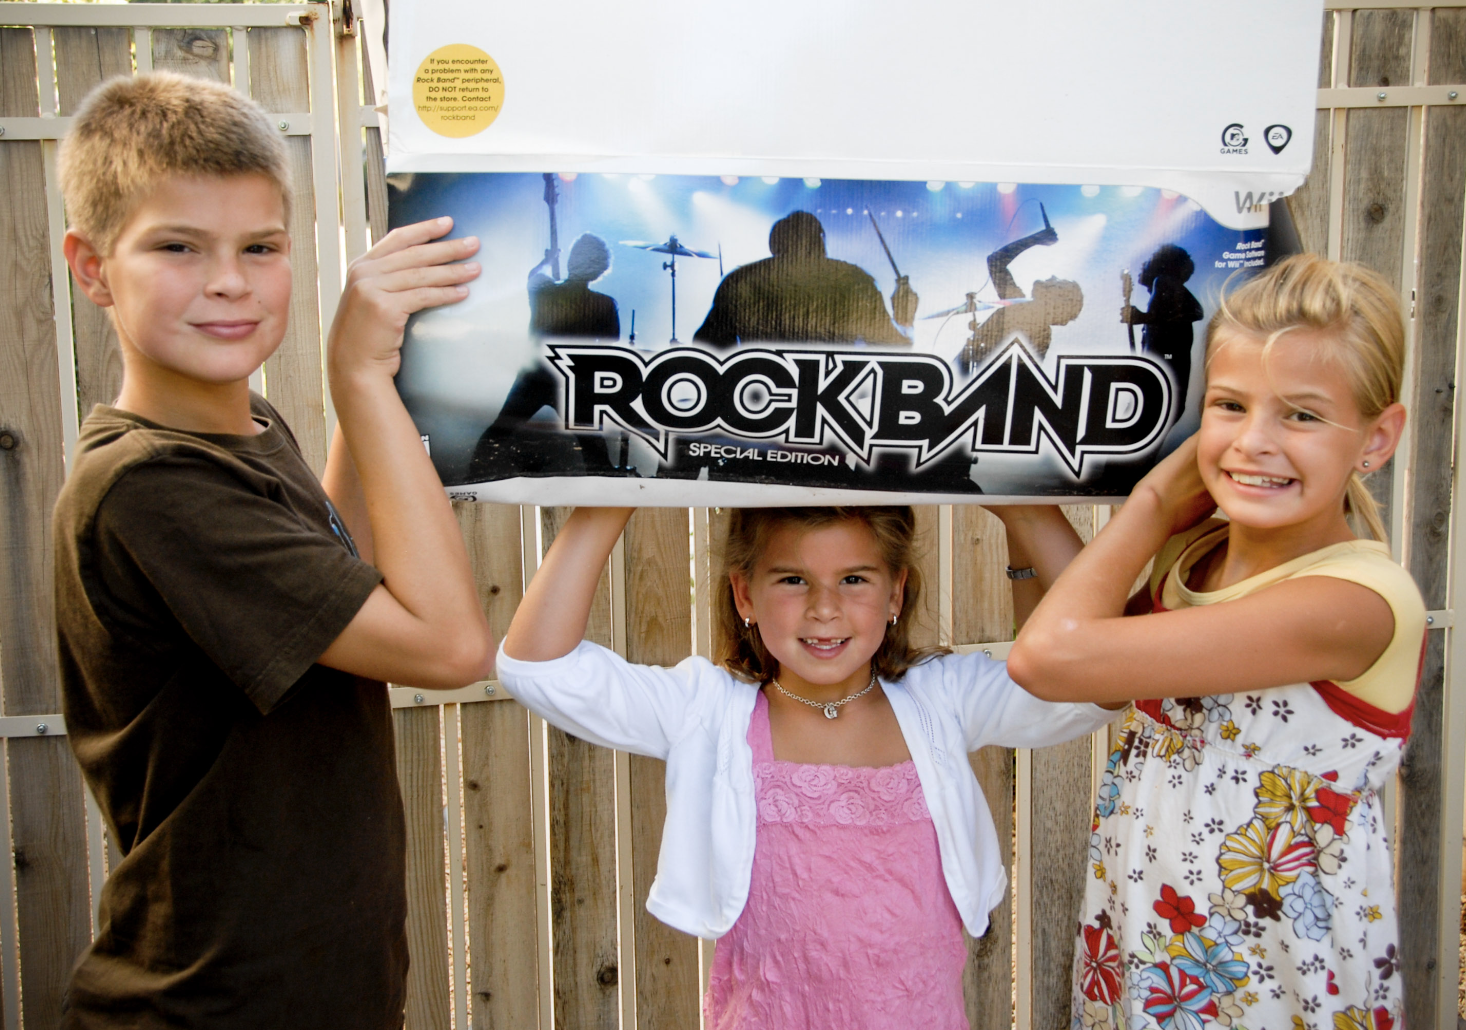 Max, Grace and Claire holding up their prized possession they earned together: Rockband